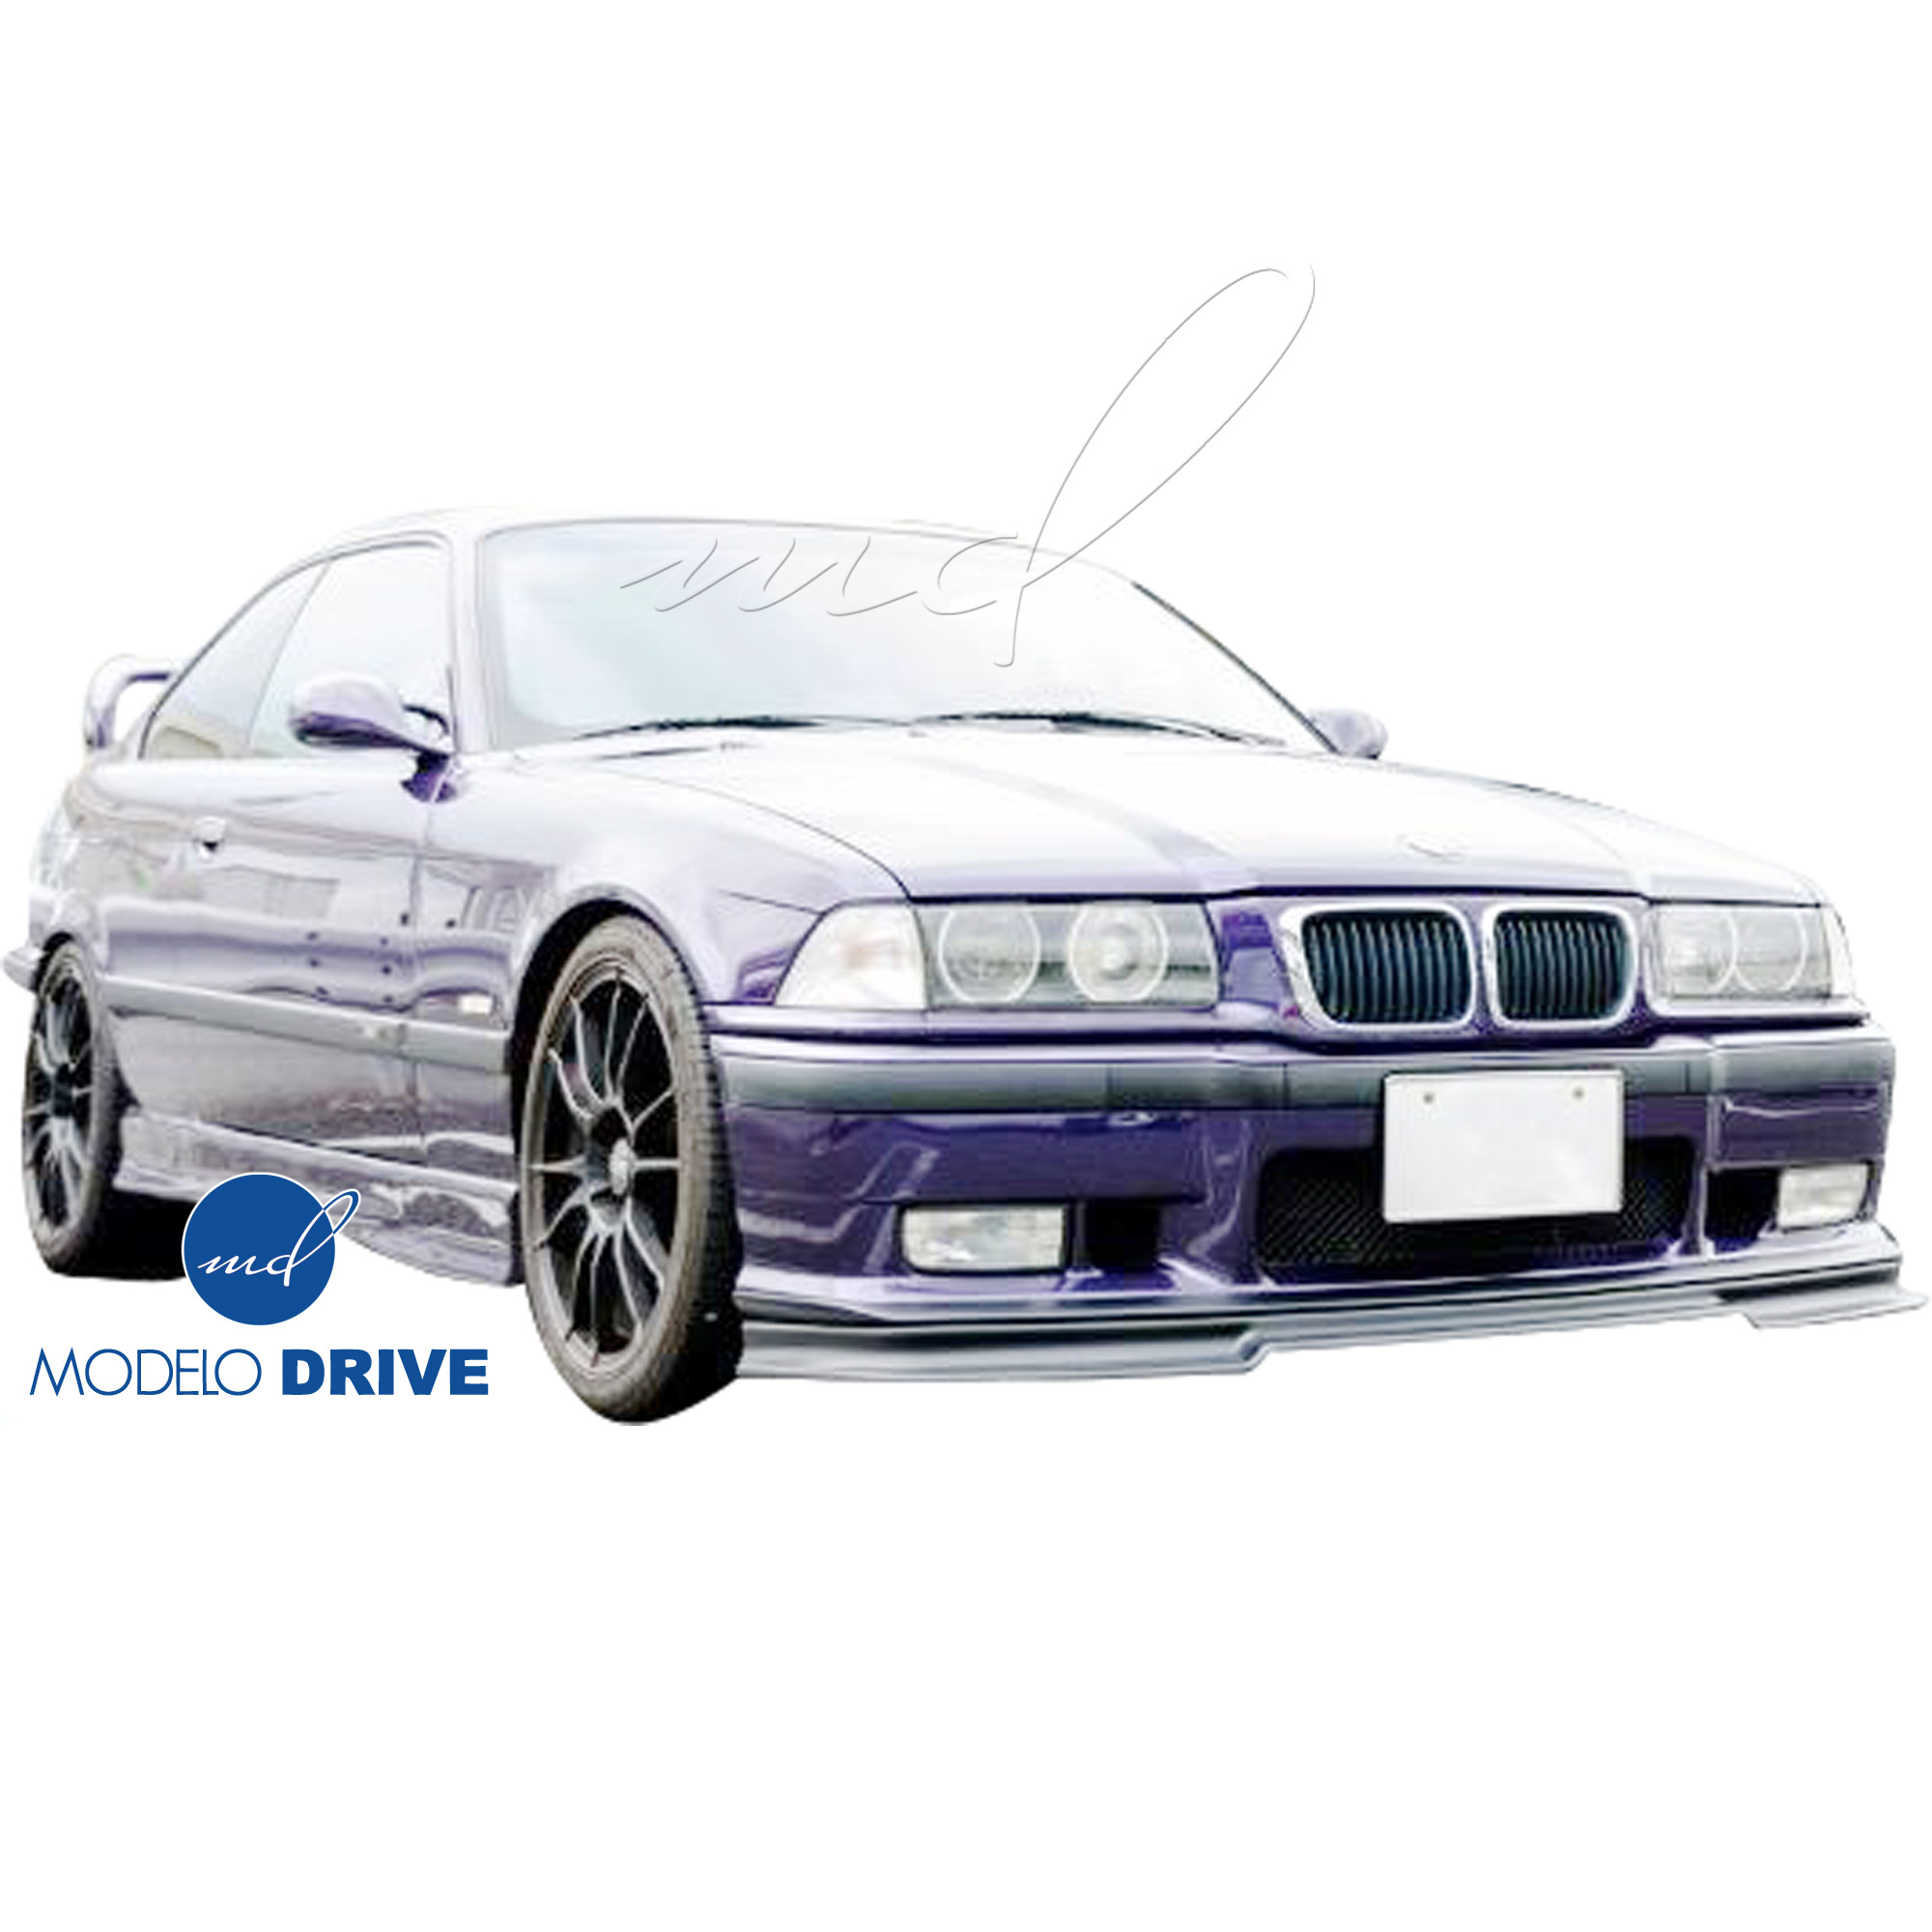 ModeloDrive FRP RIEG GT CUP Front Valance Add-on > BMW M3 E36 1992-1998 > 2dr - Image 3